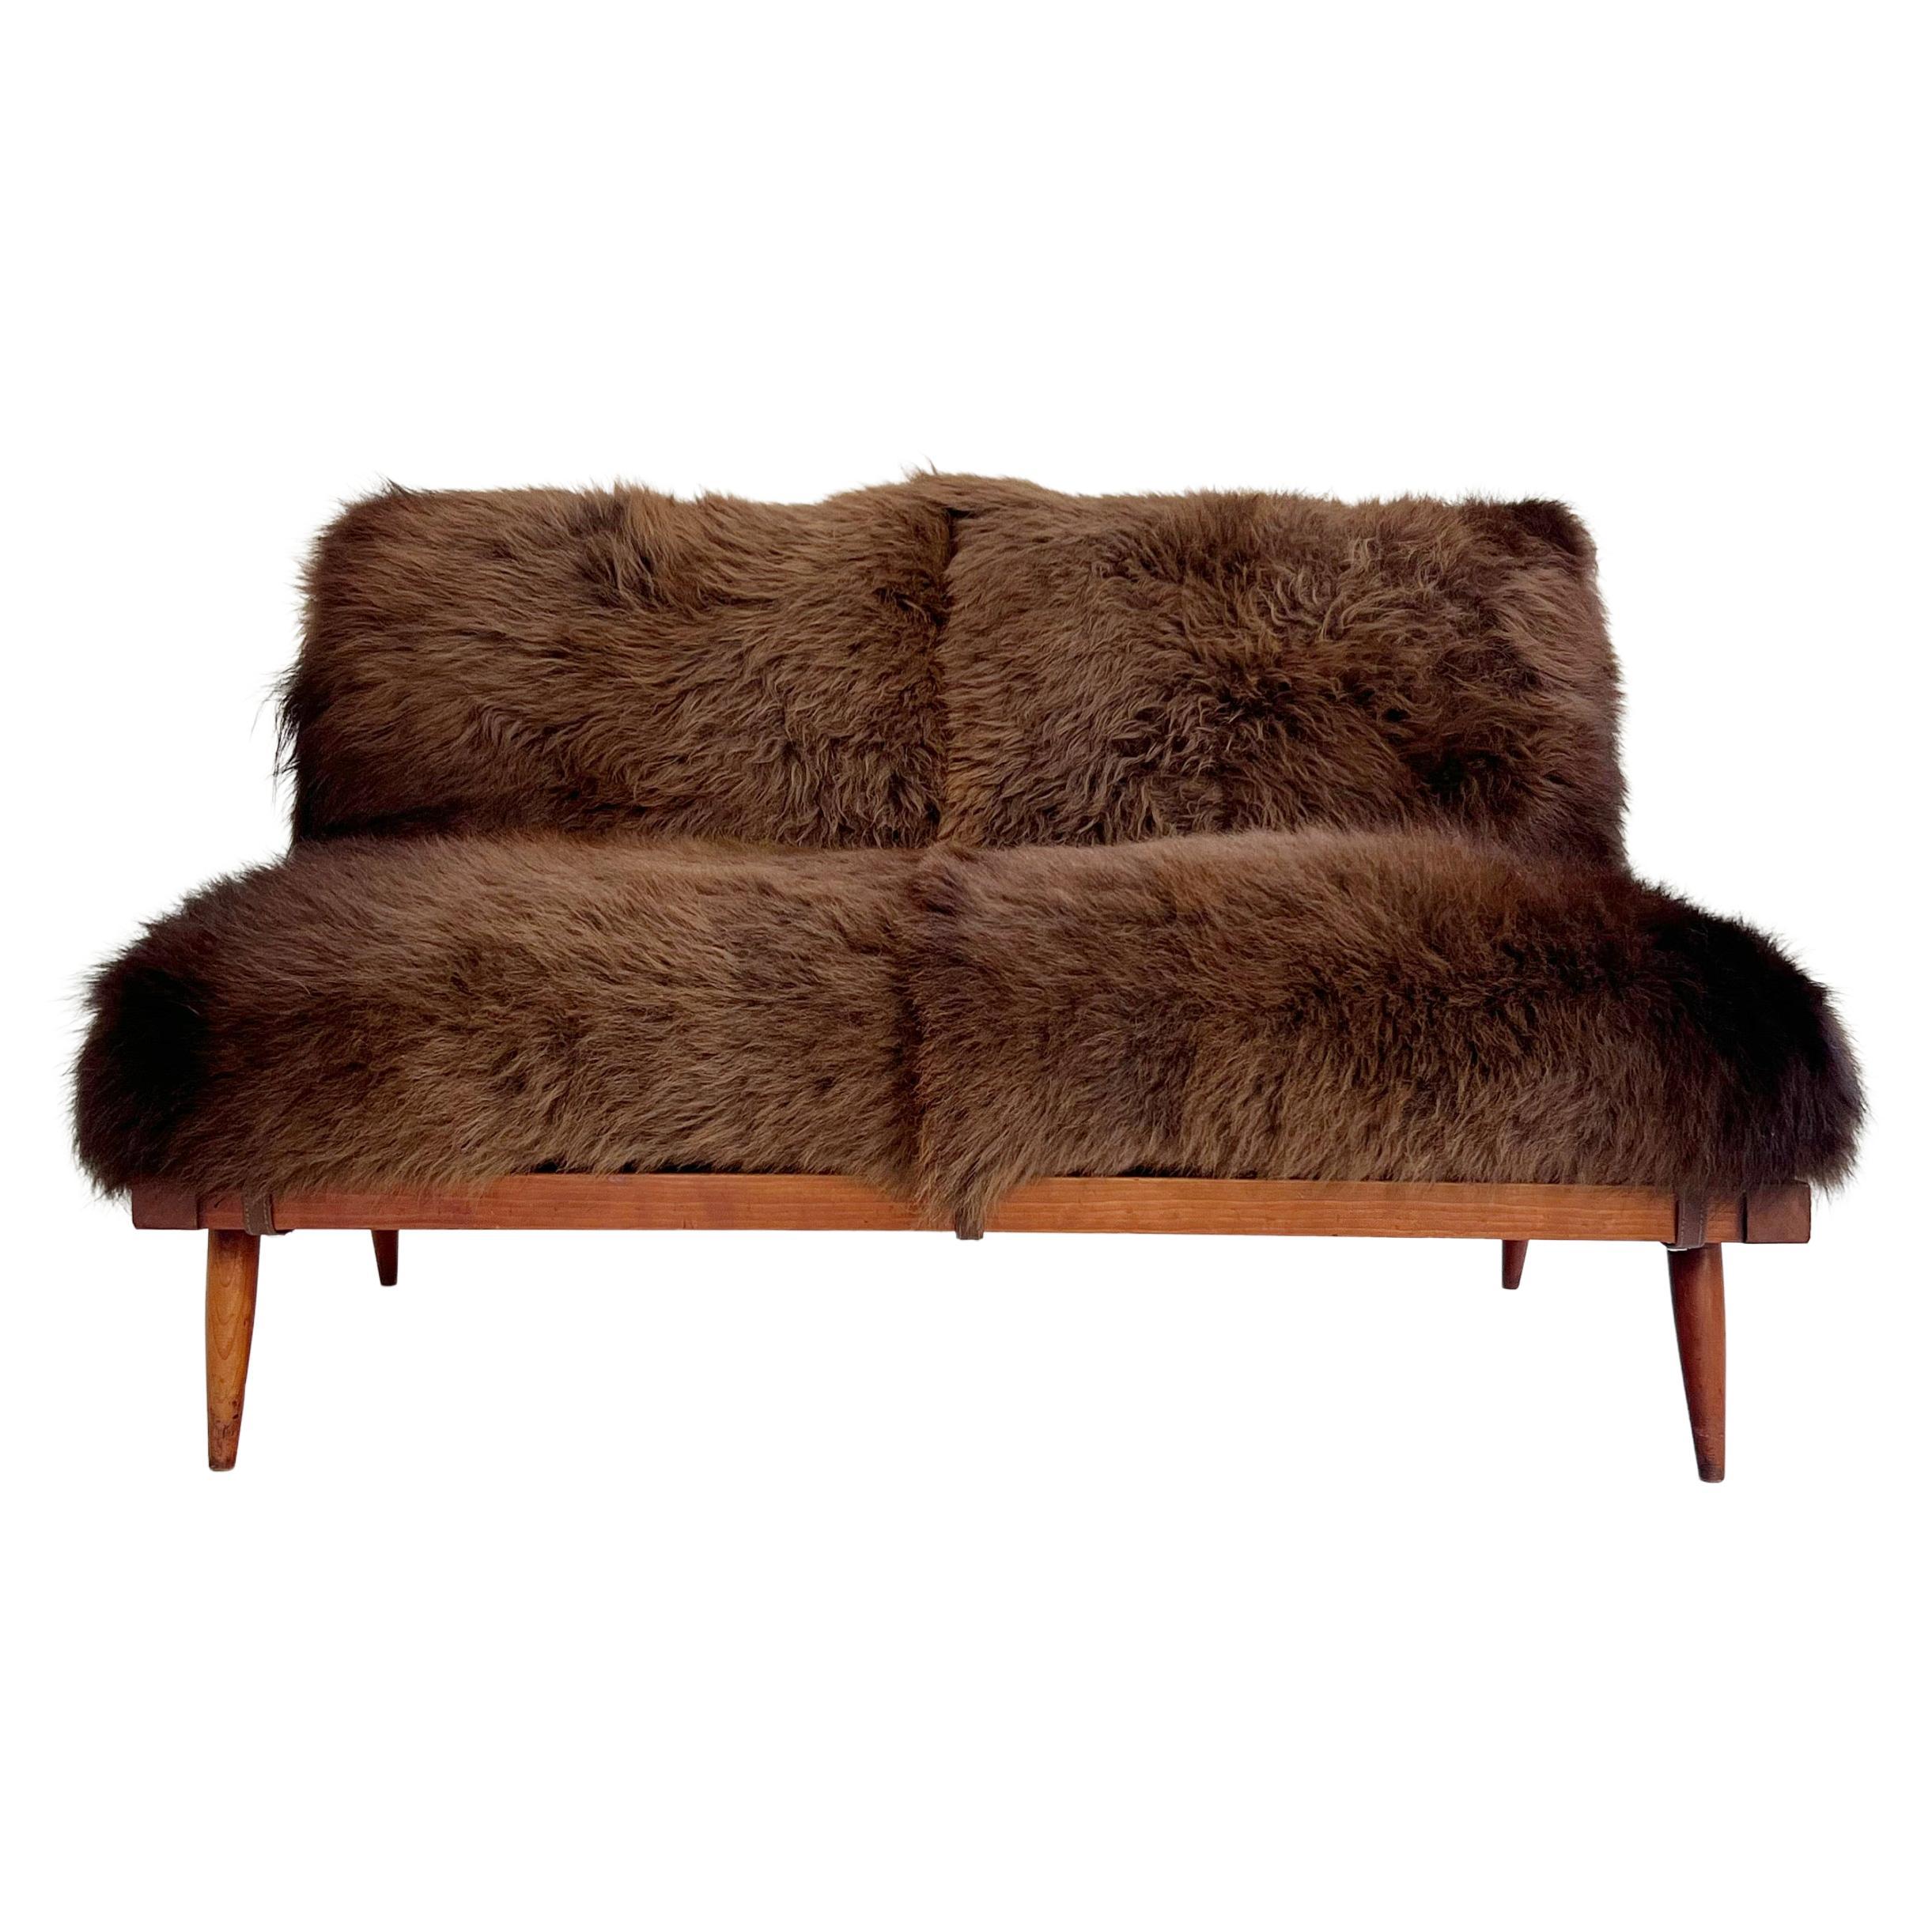 George Nakashima Settee with American Bison Hide Cushions